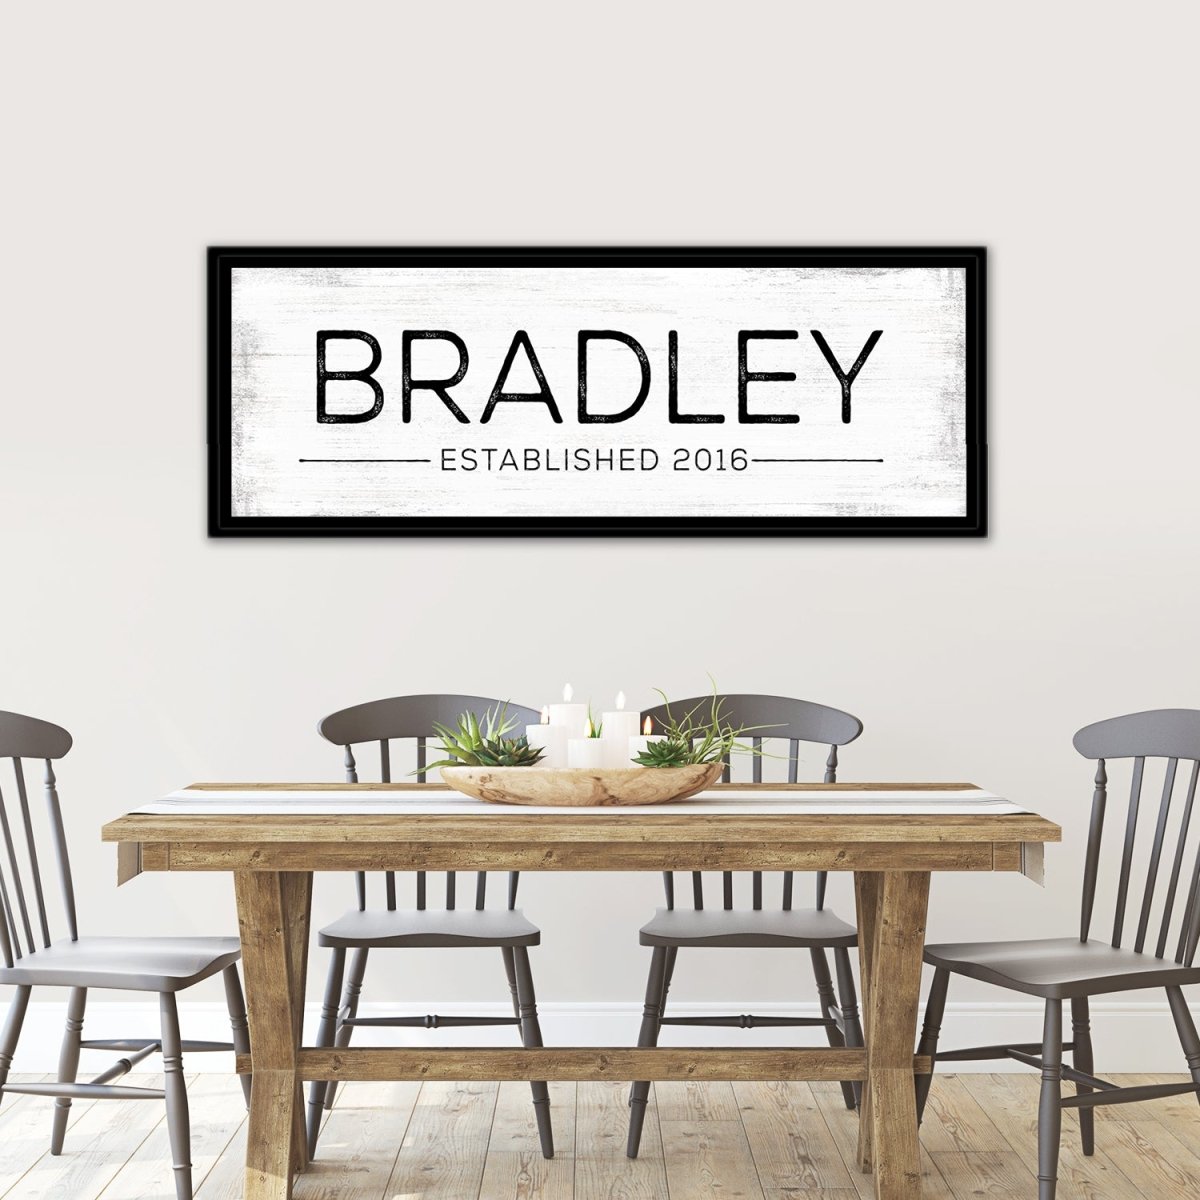 Large Personalized Family Name Signs Above Kitchen Table - Pretty Perfect Studio